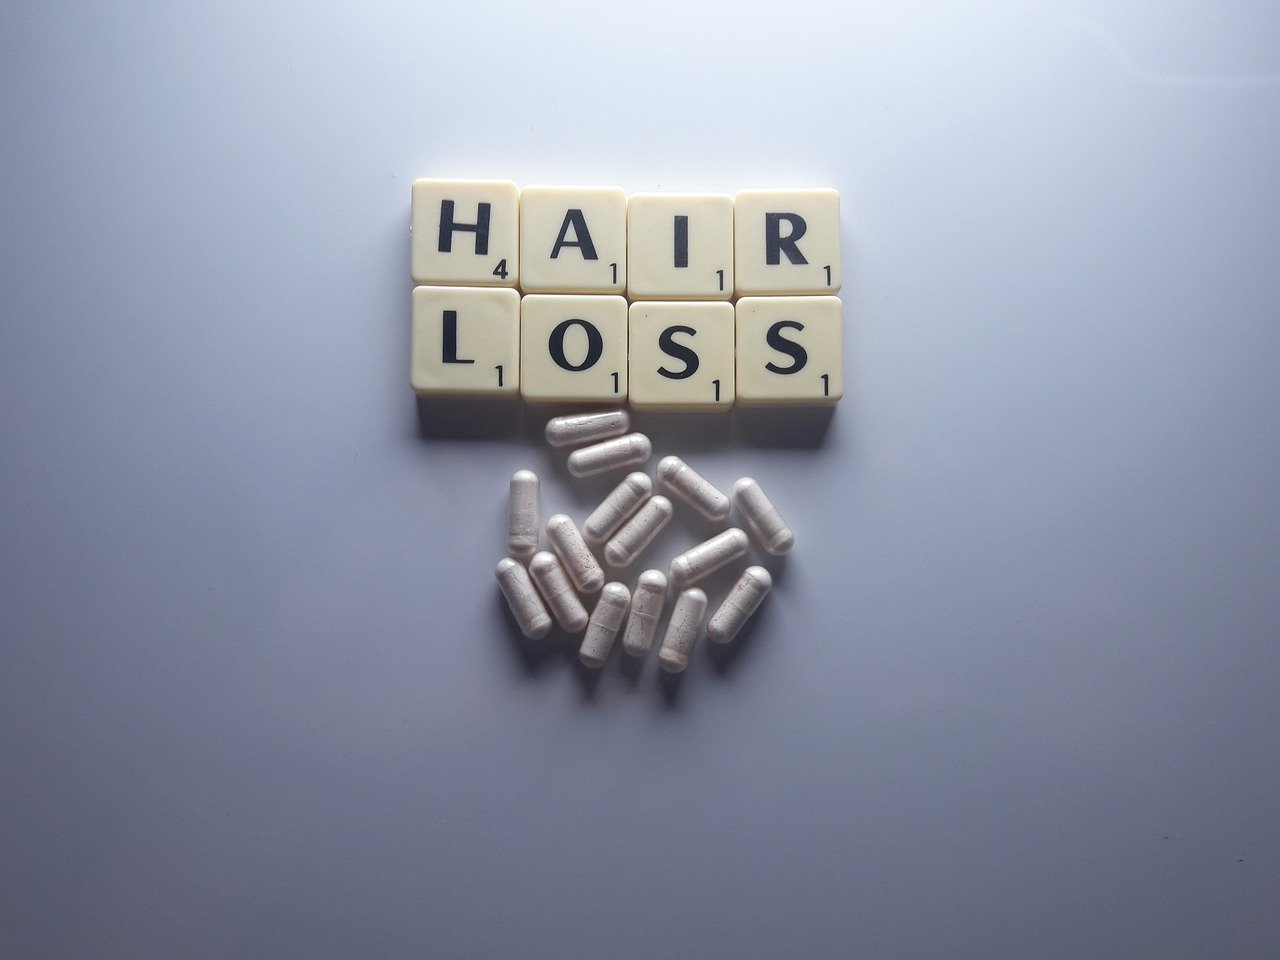 What causes hair loss